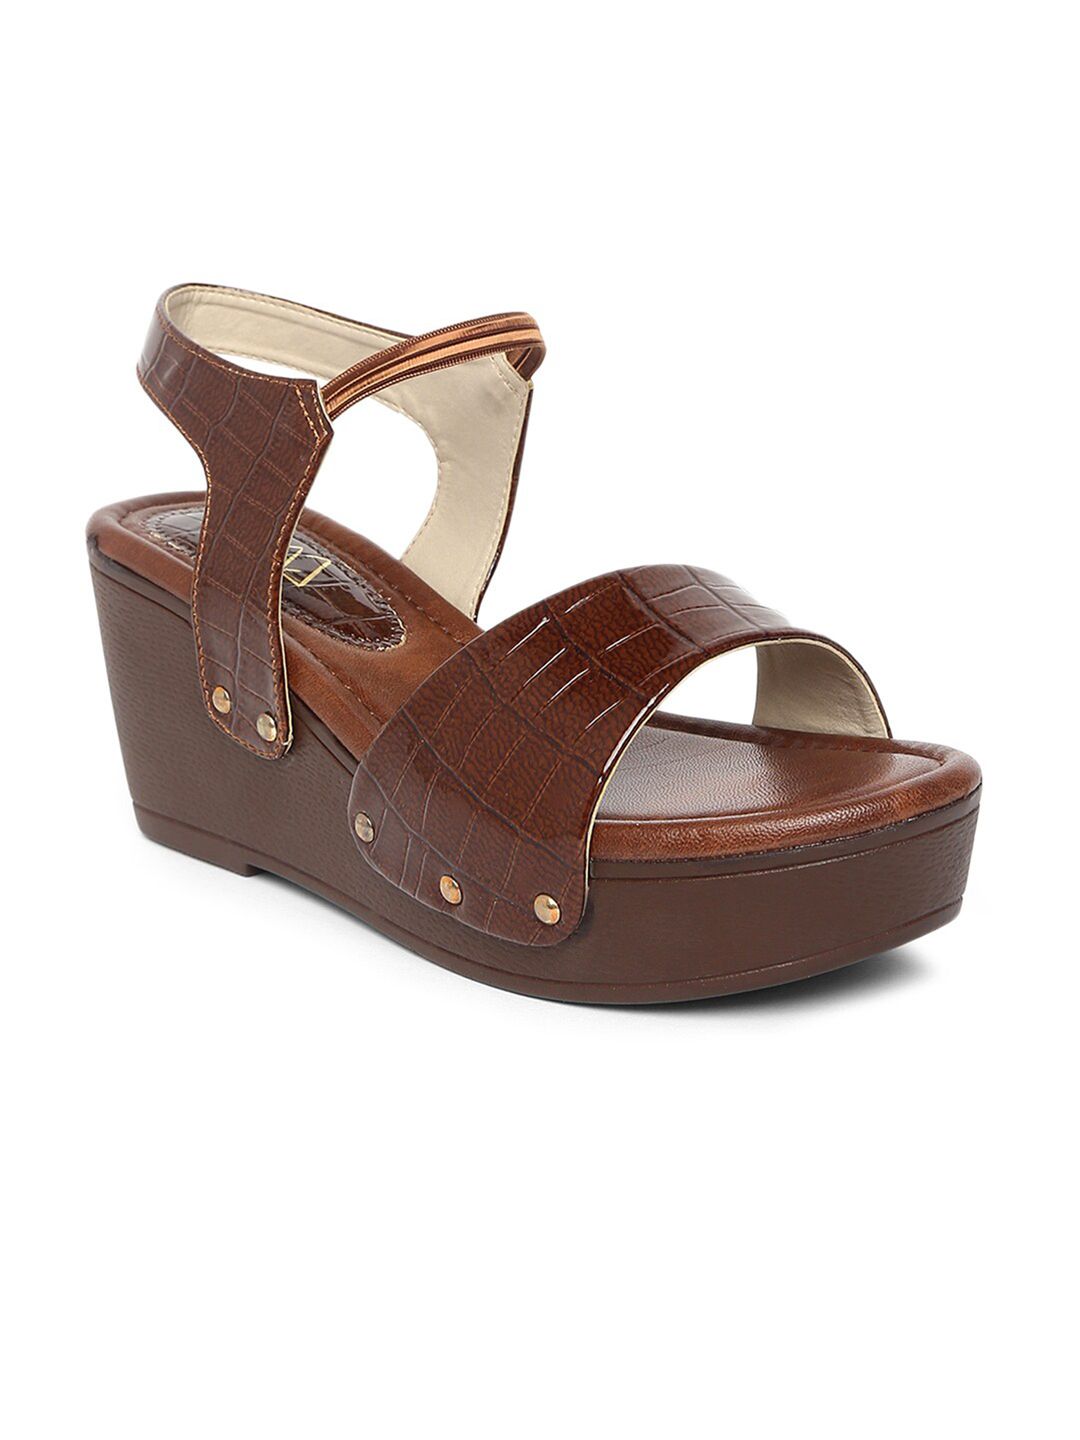 EVERLY Brown Textured Leather Wedges Price in India